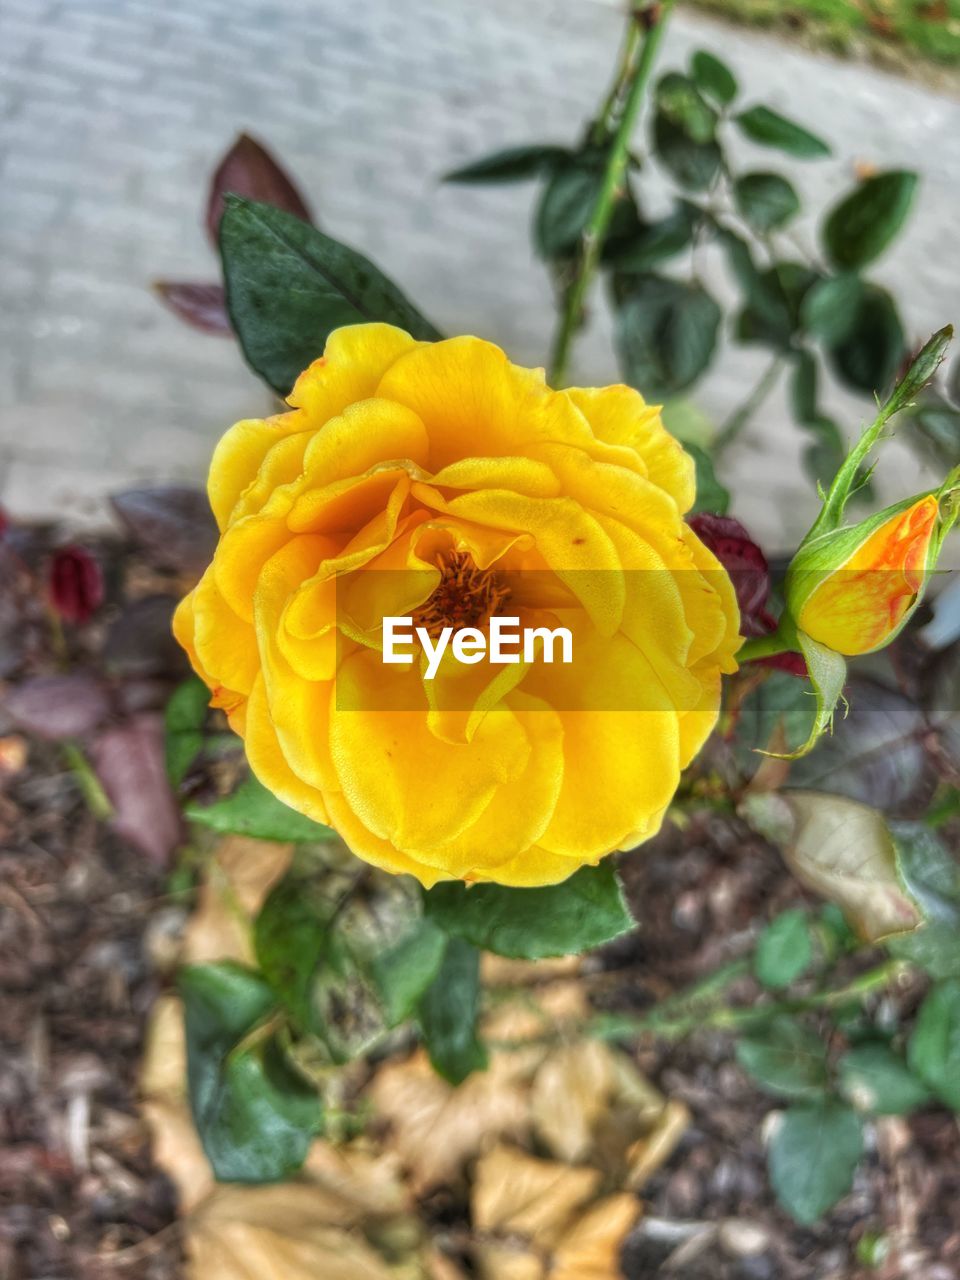 yellow, flowering plant, flower, plant, beauty in nature, freshness, flower head, petal, nature, close-up, inflorescence, fragility, rose, growth, leaf, plant part, no people, focus on foreground, outdoors, high angle view, day, springtime, blossom